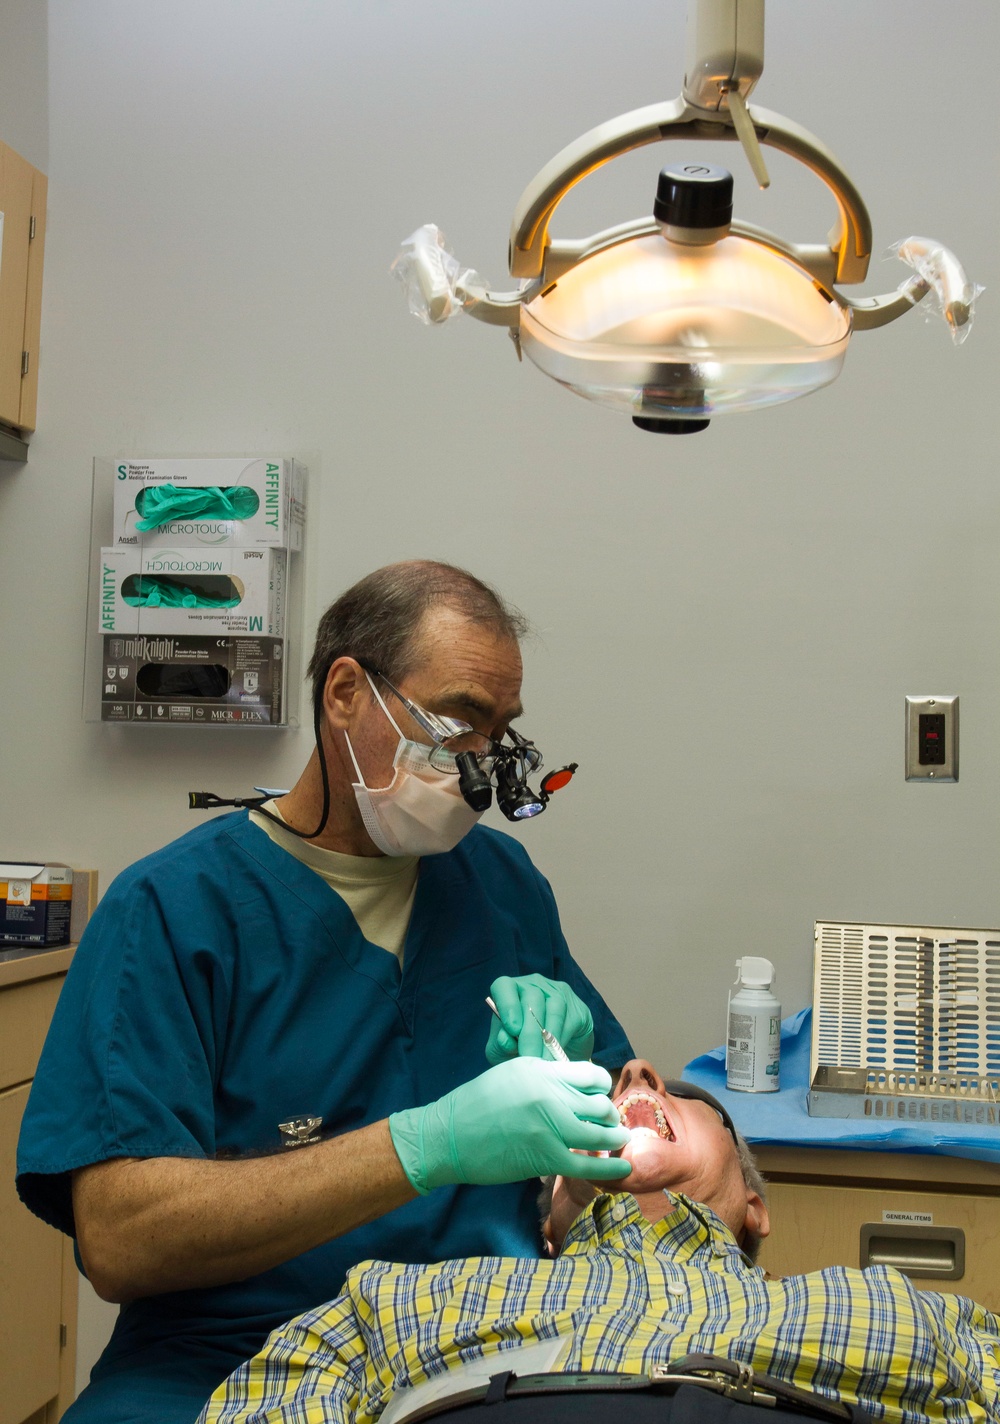 Retirees, dependents and dentists in training benefit from program